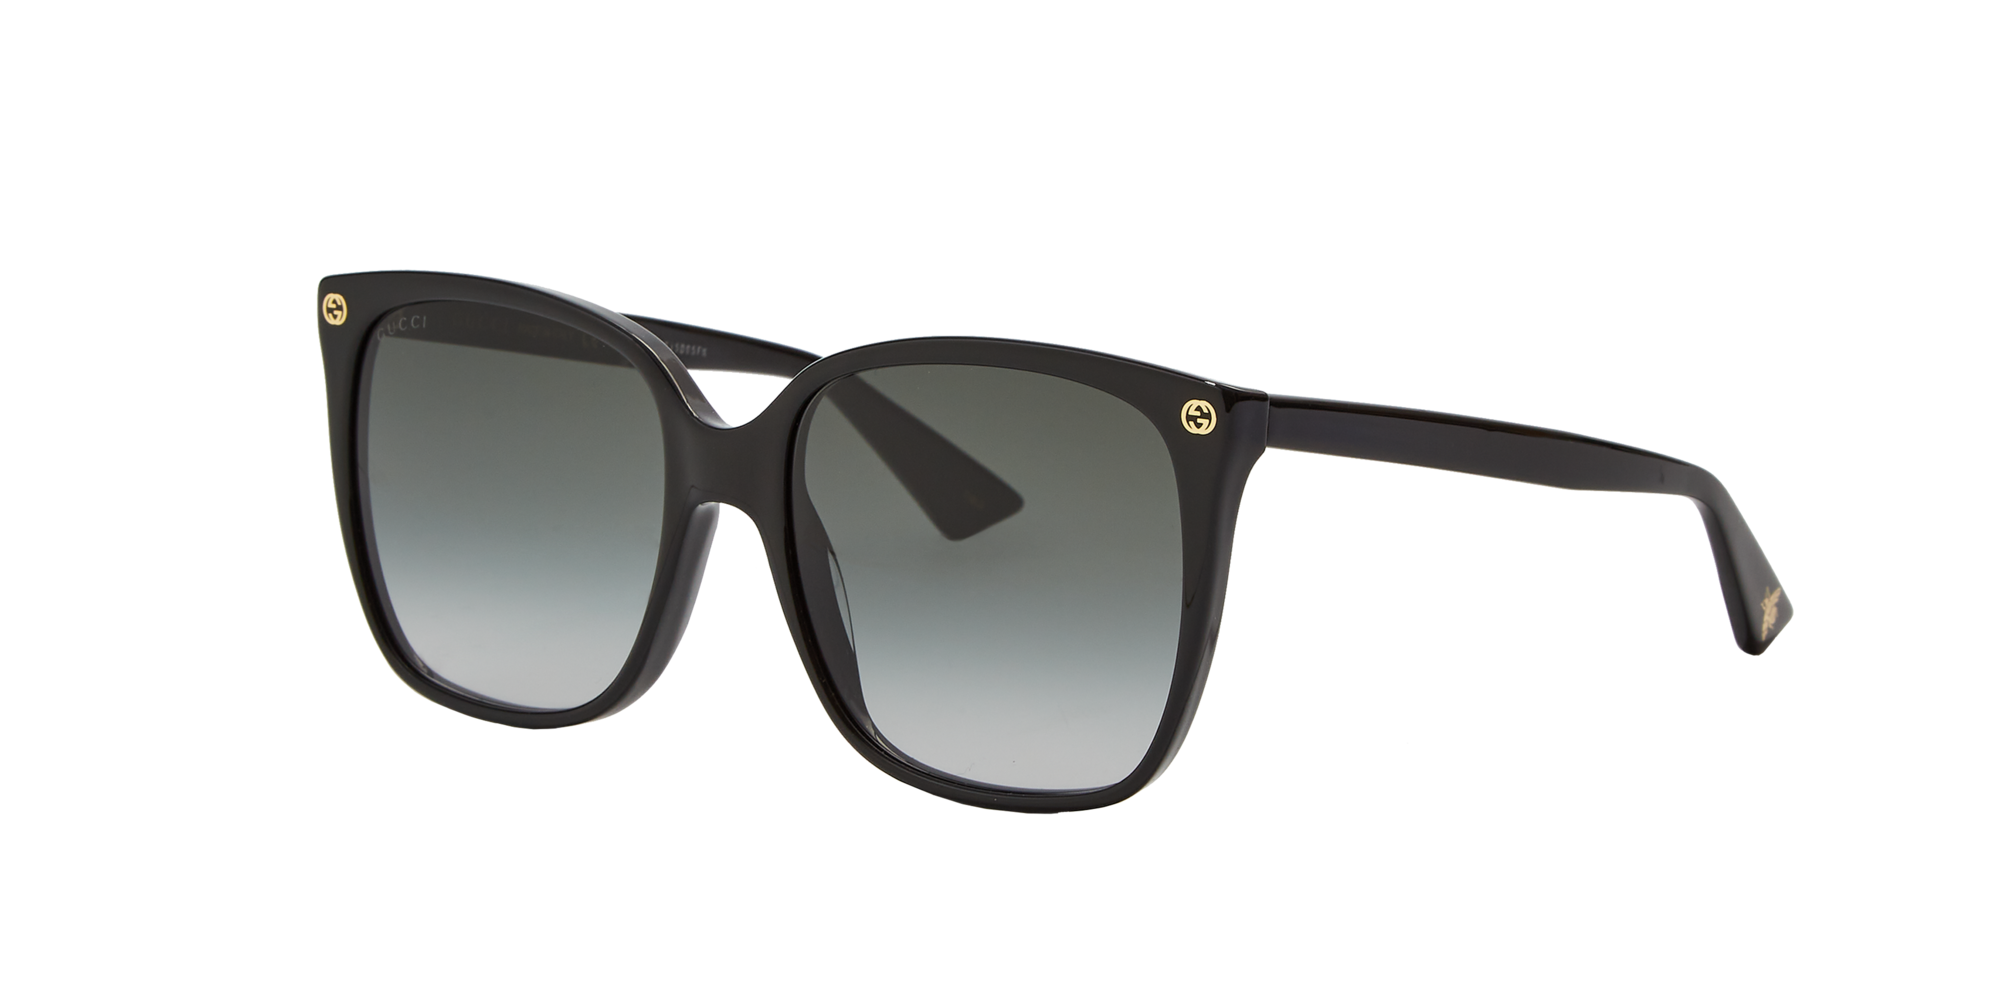 gucci sunglasses afterpay